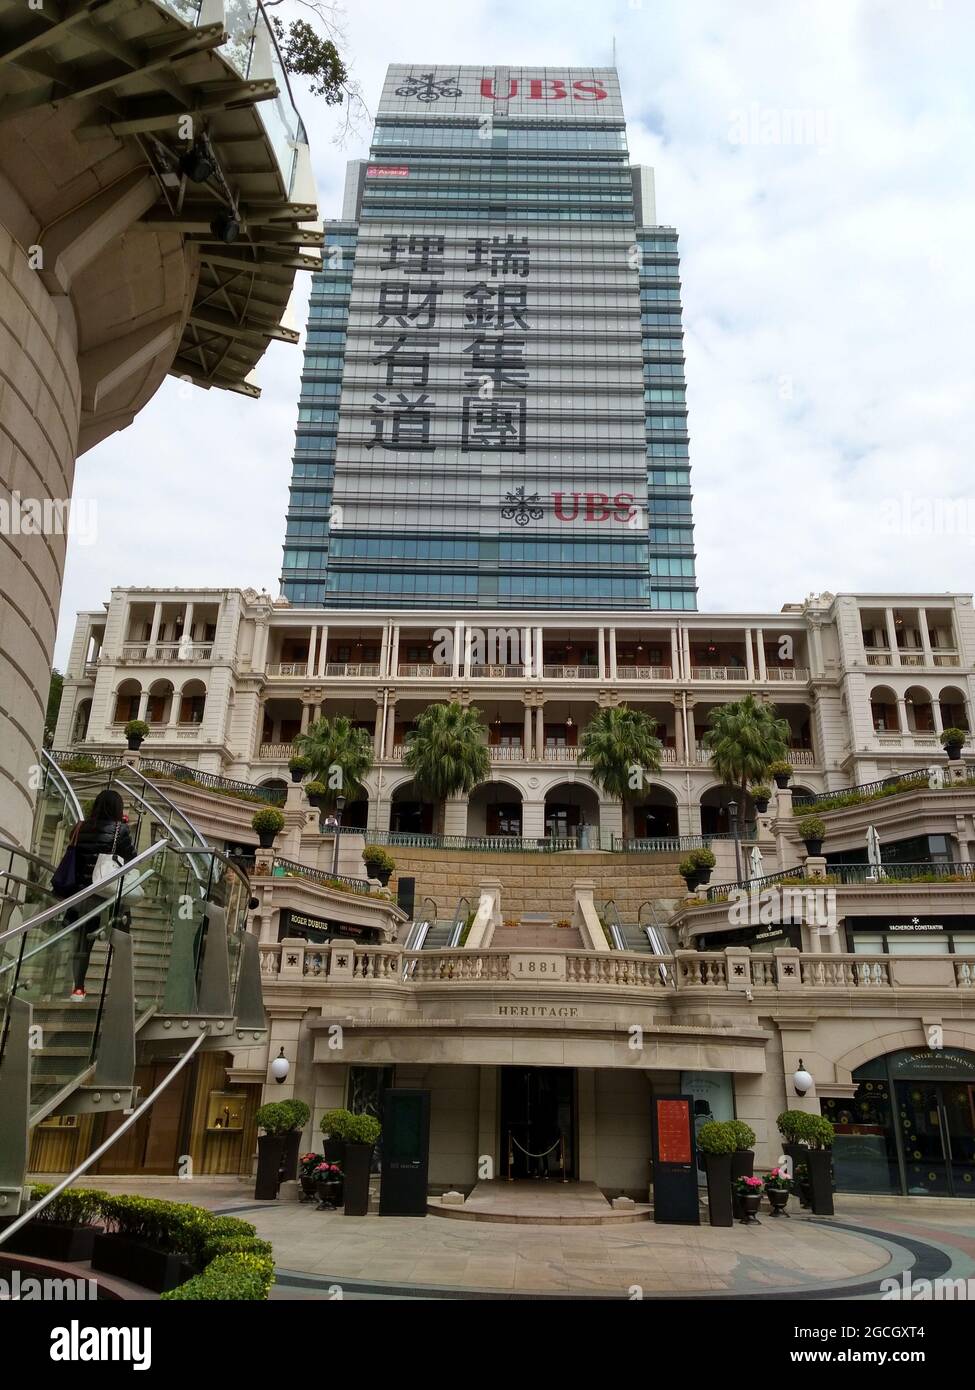 The beautiful 1881 Heritage formerly the Old Marine Police Headquarters located in Kowloon district of Hong Kong. Stock Photo